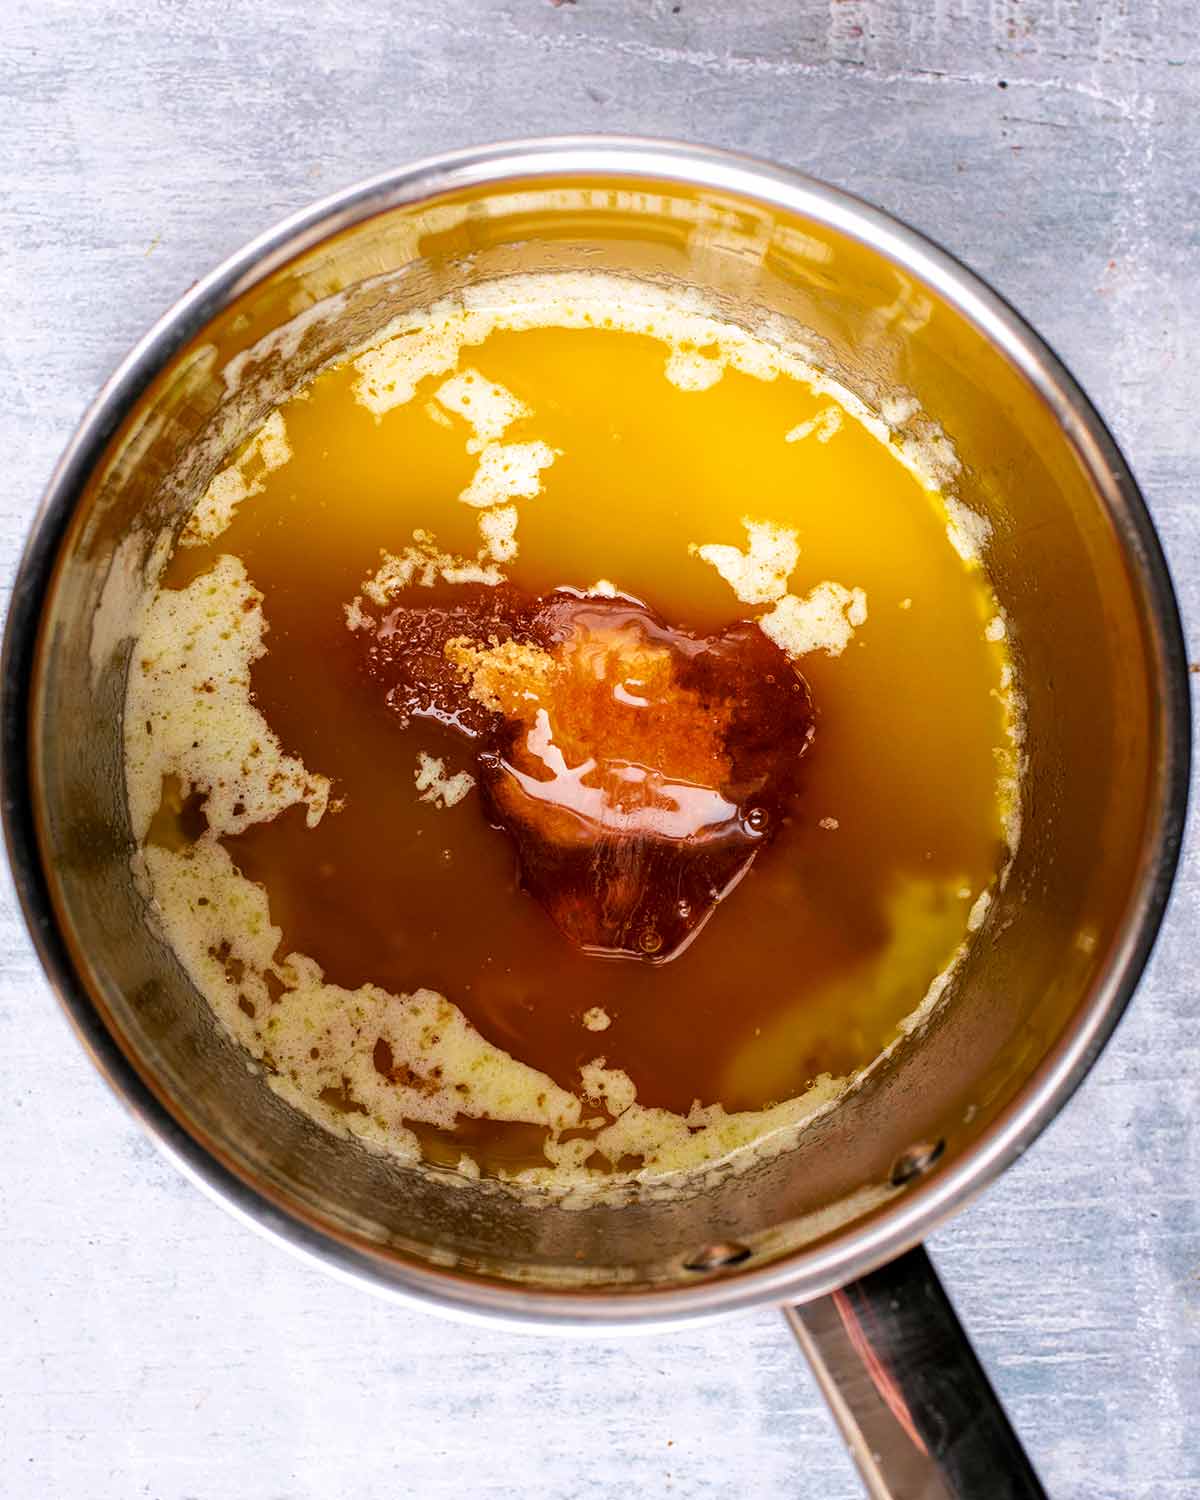 A stainless steel saucepan containing melted butter, sugar and golden syrup.